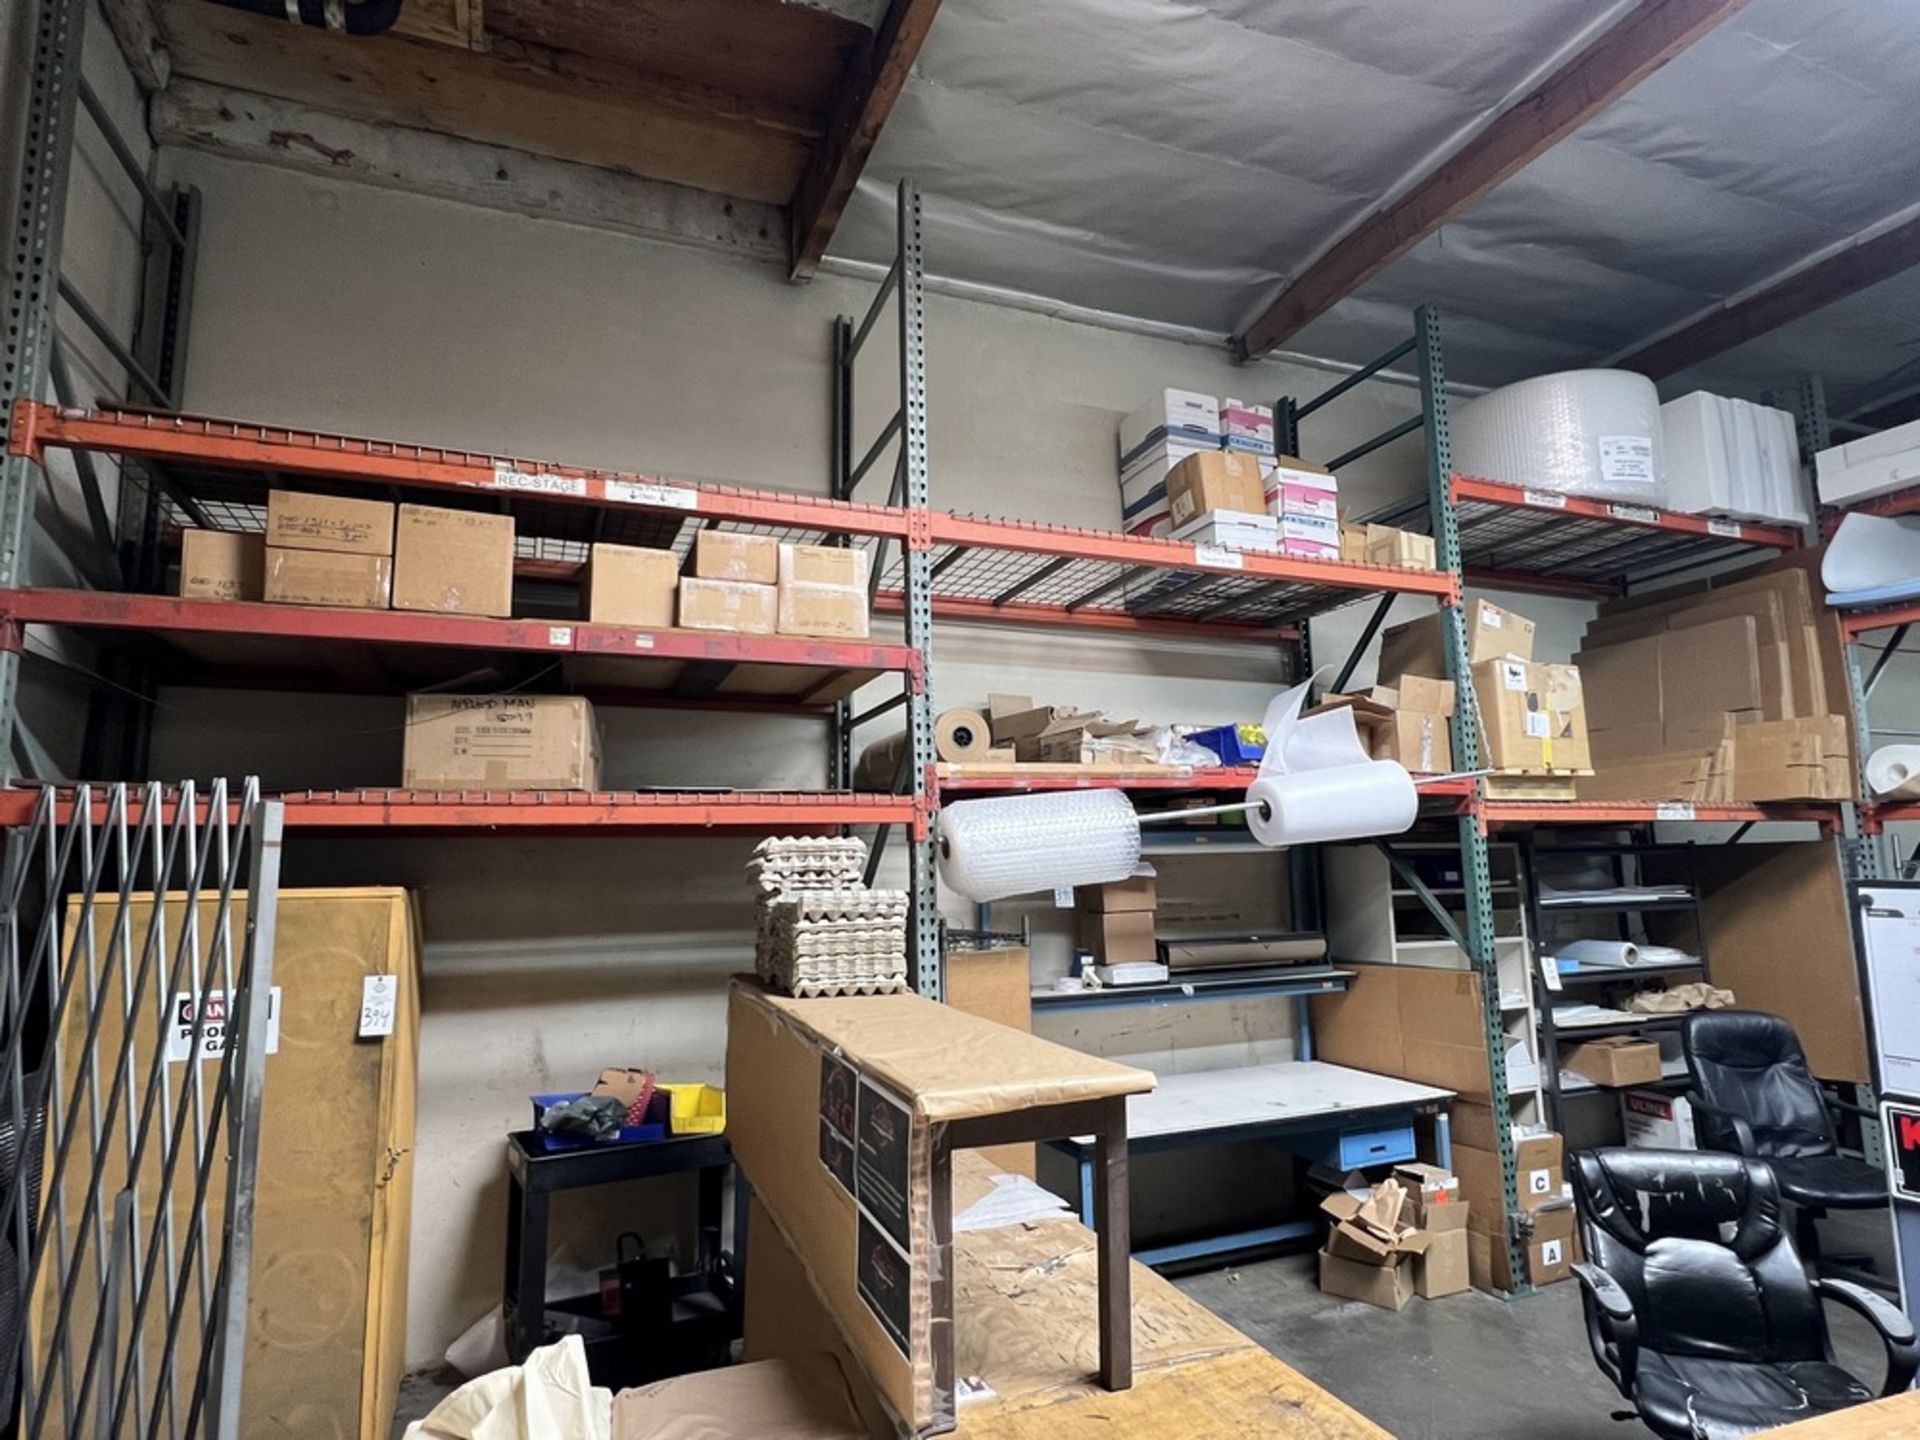 Pallet Racking 297" x 42" x 14', Total of 7 Tiers (No Contents)